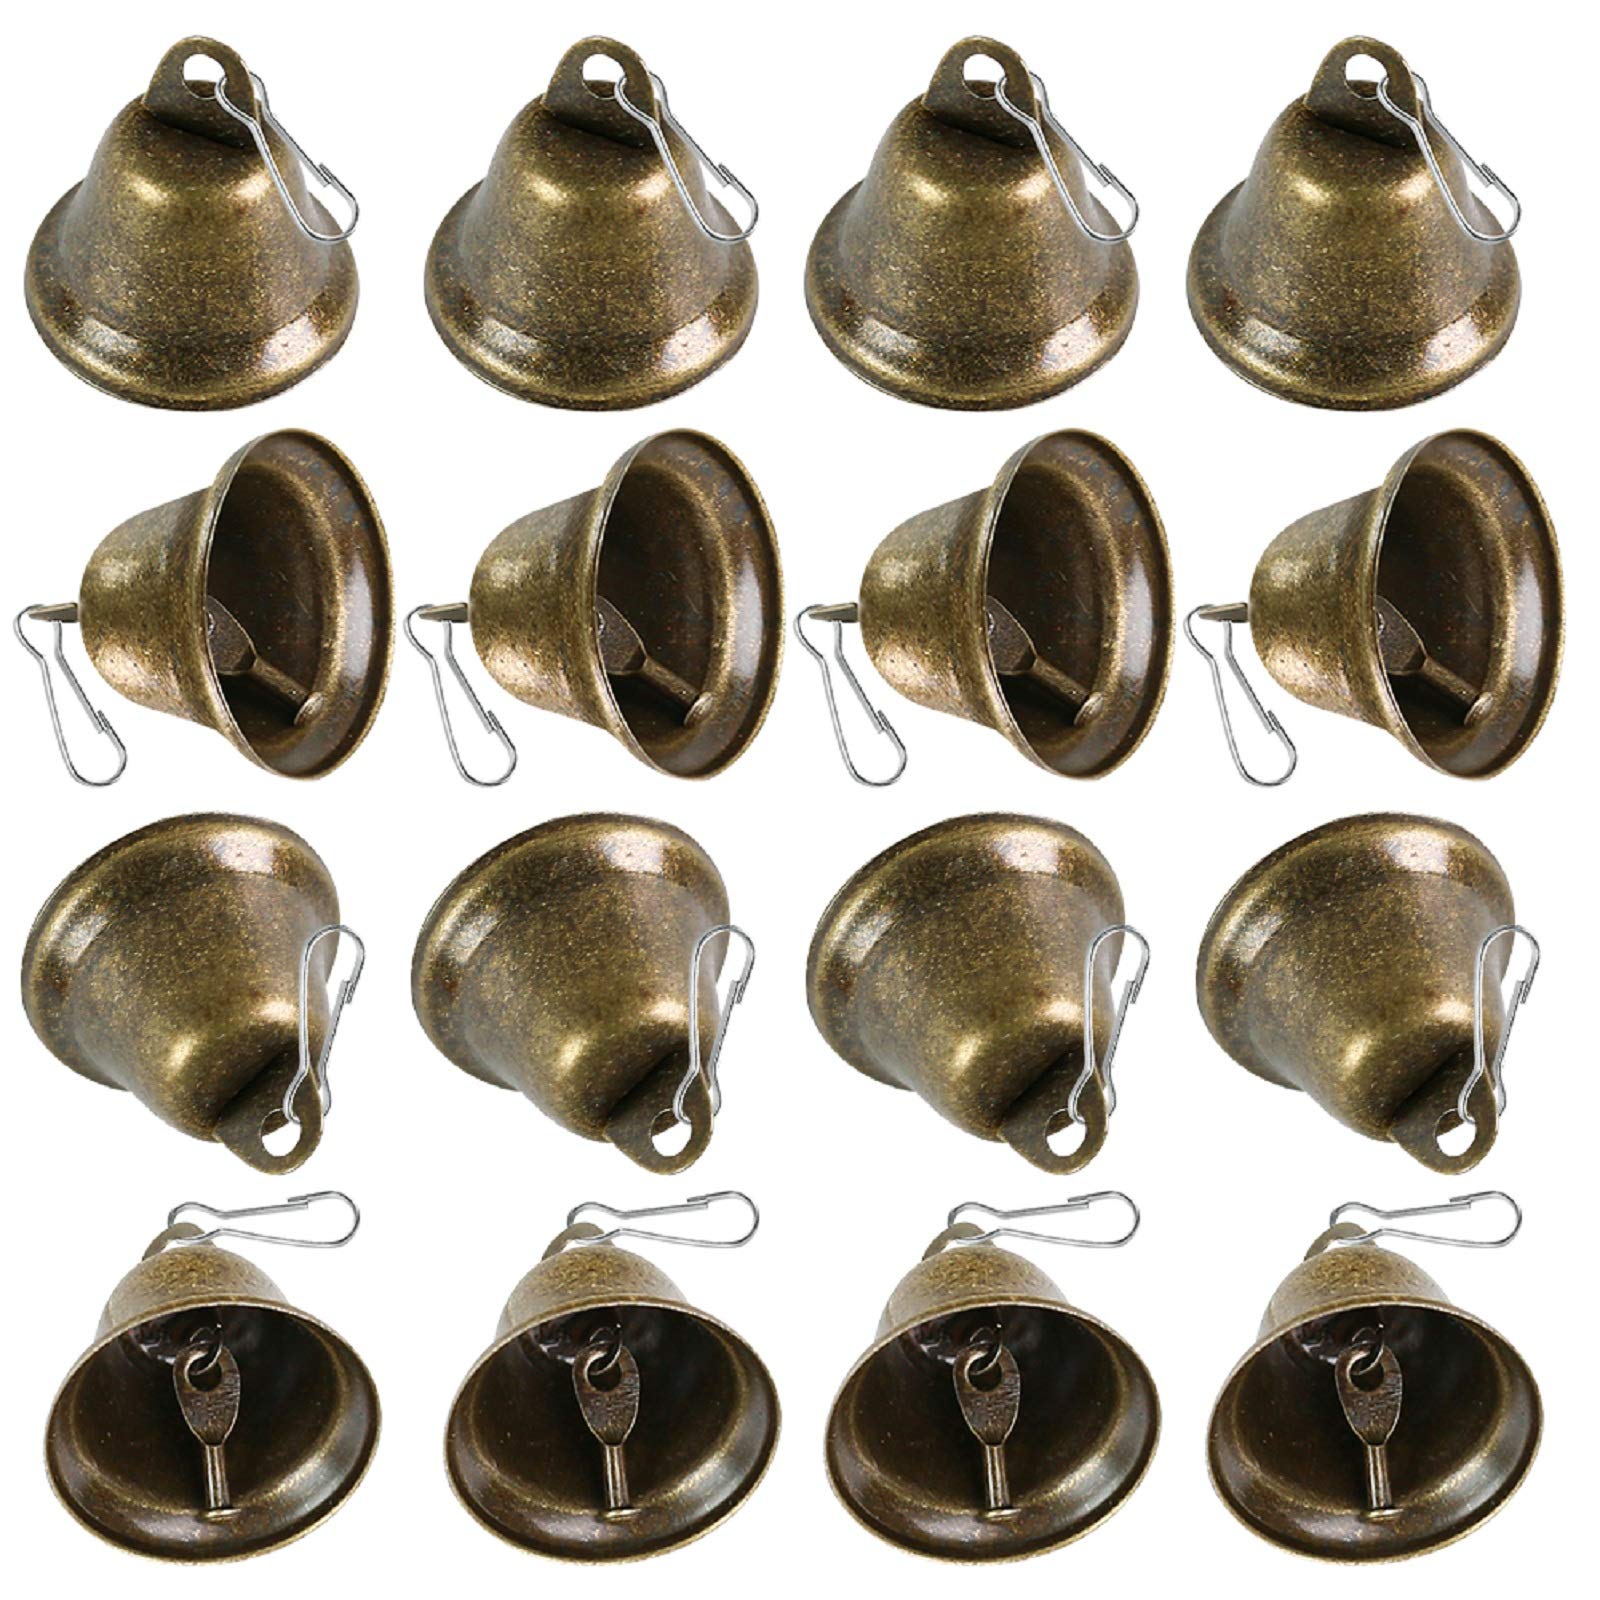  30 Pieces Craft Bells Small Brass Bells for Crafts